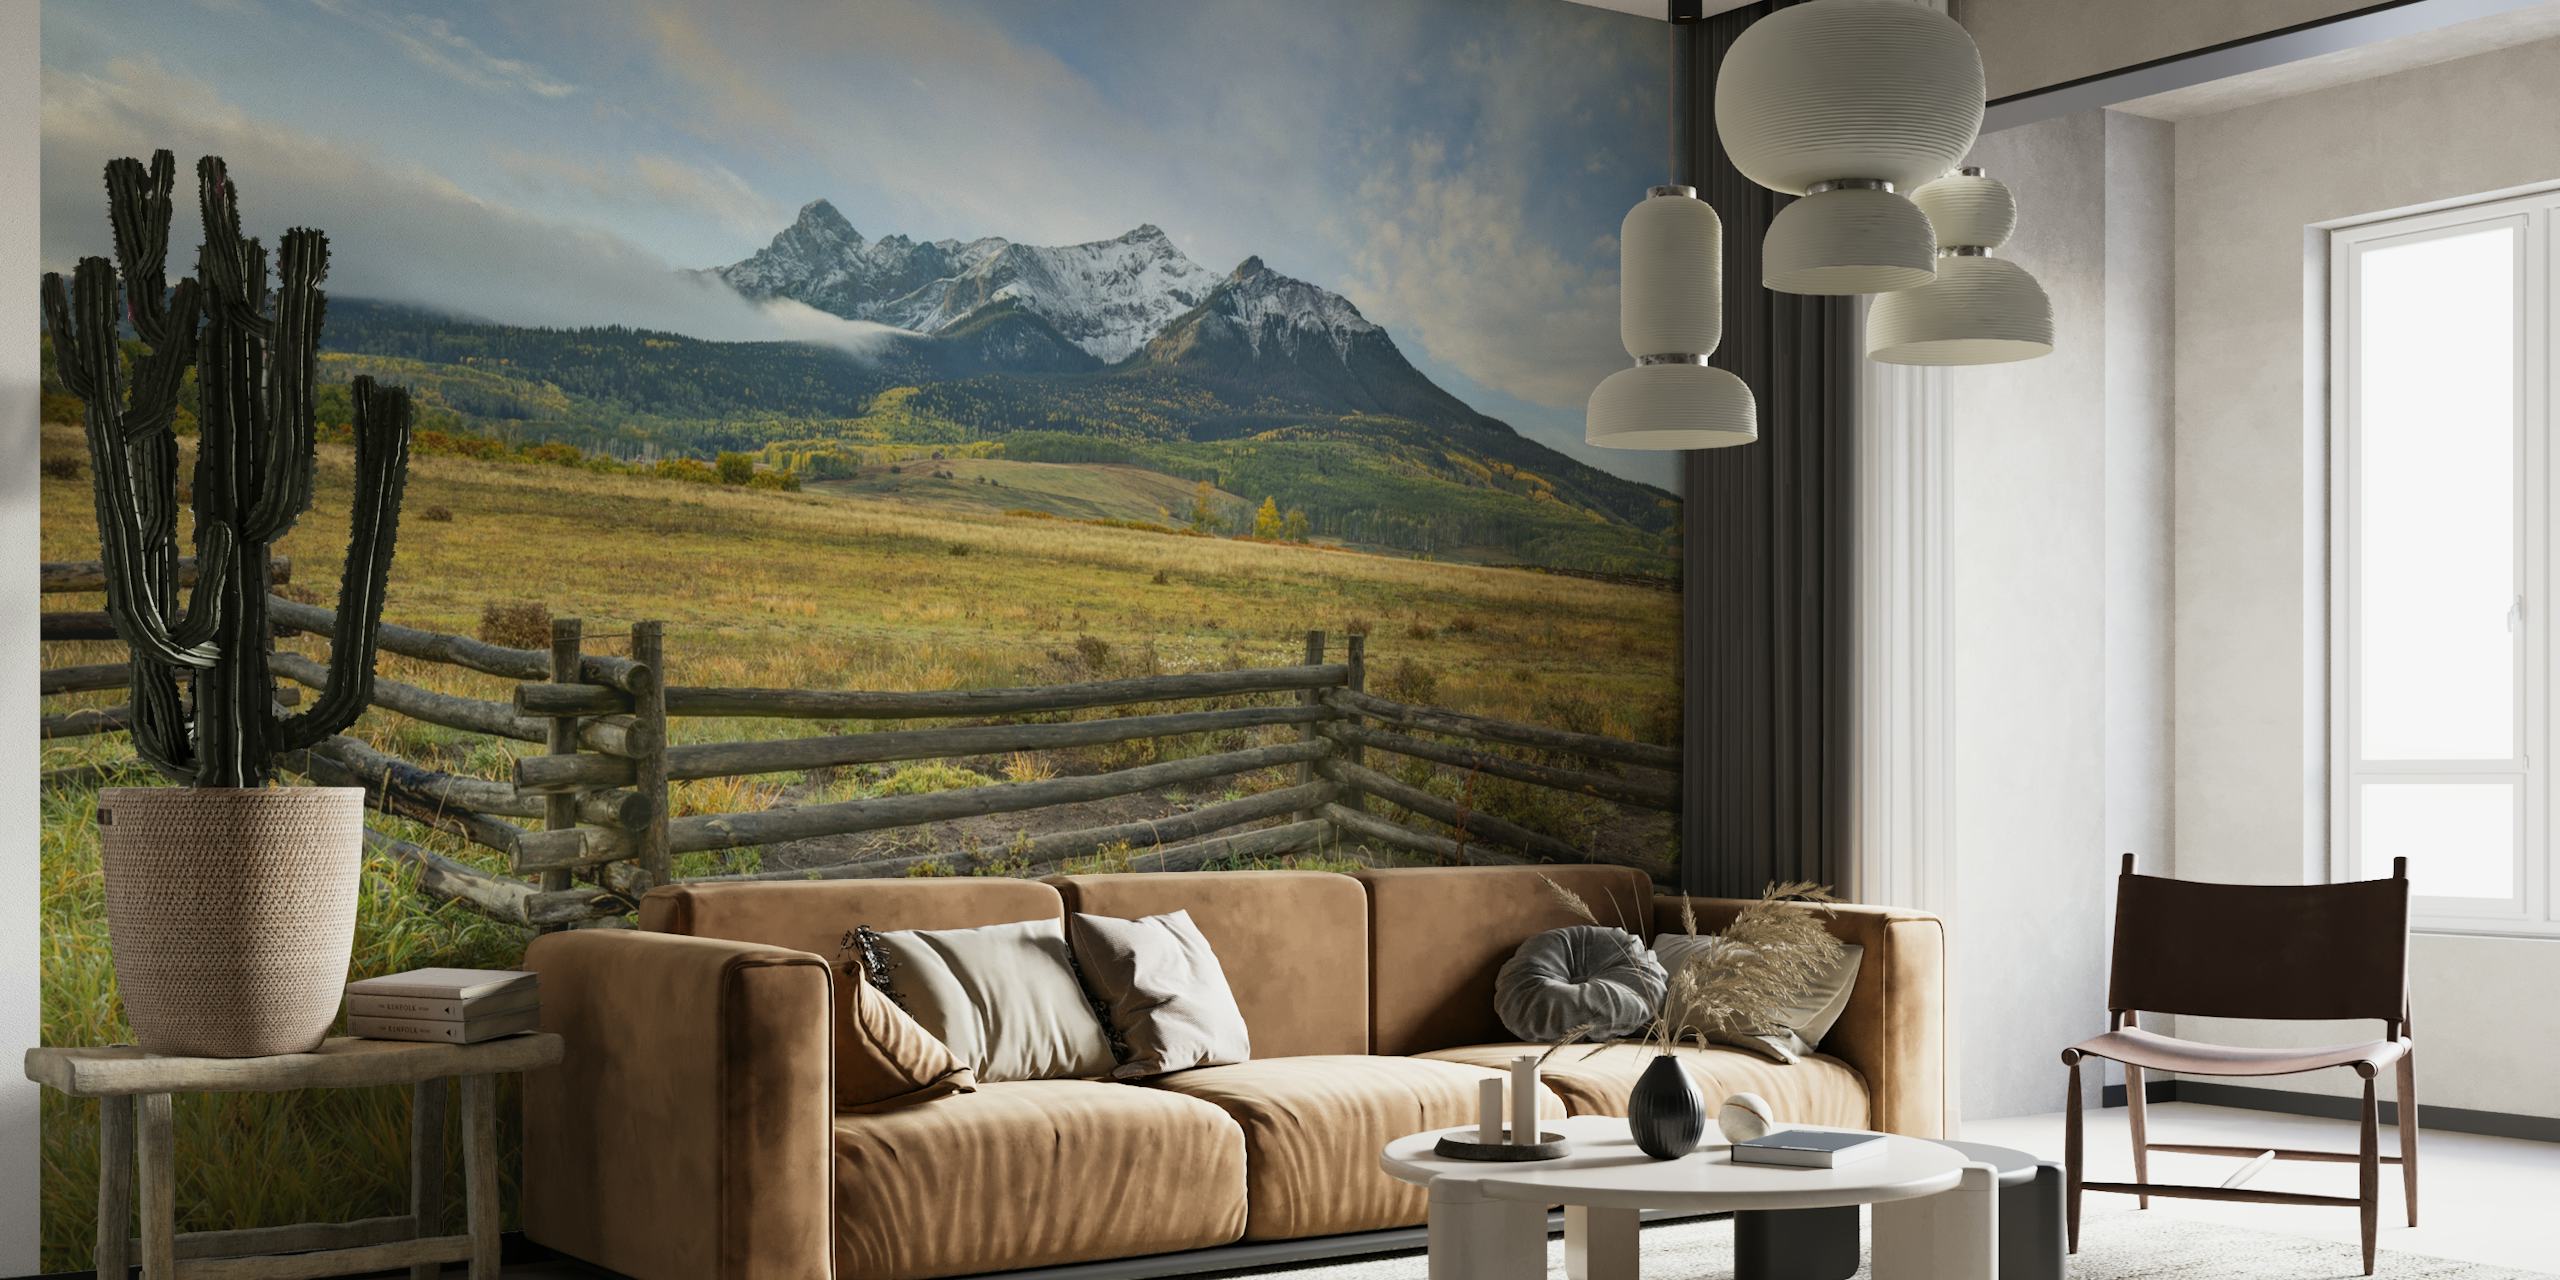 Wall mural of Morning Glory at Mt. Sneffels with sunrise and wooden fence